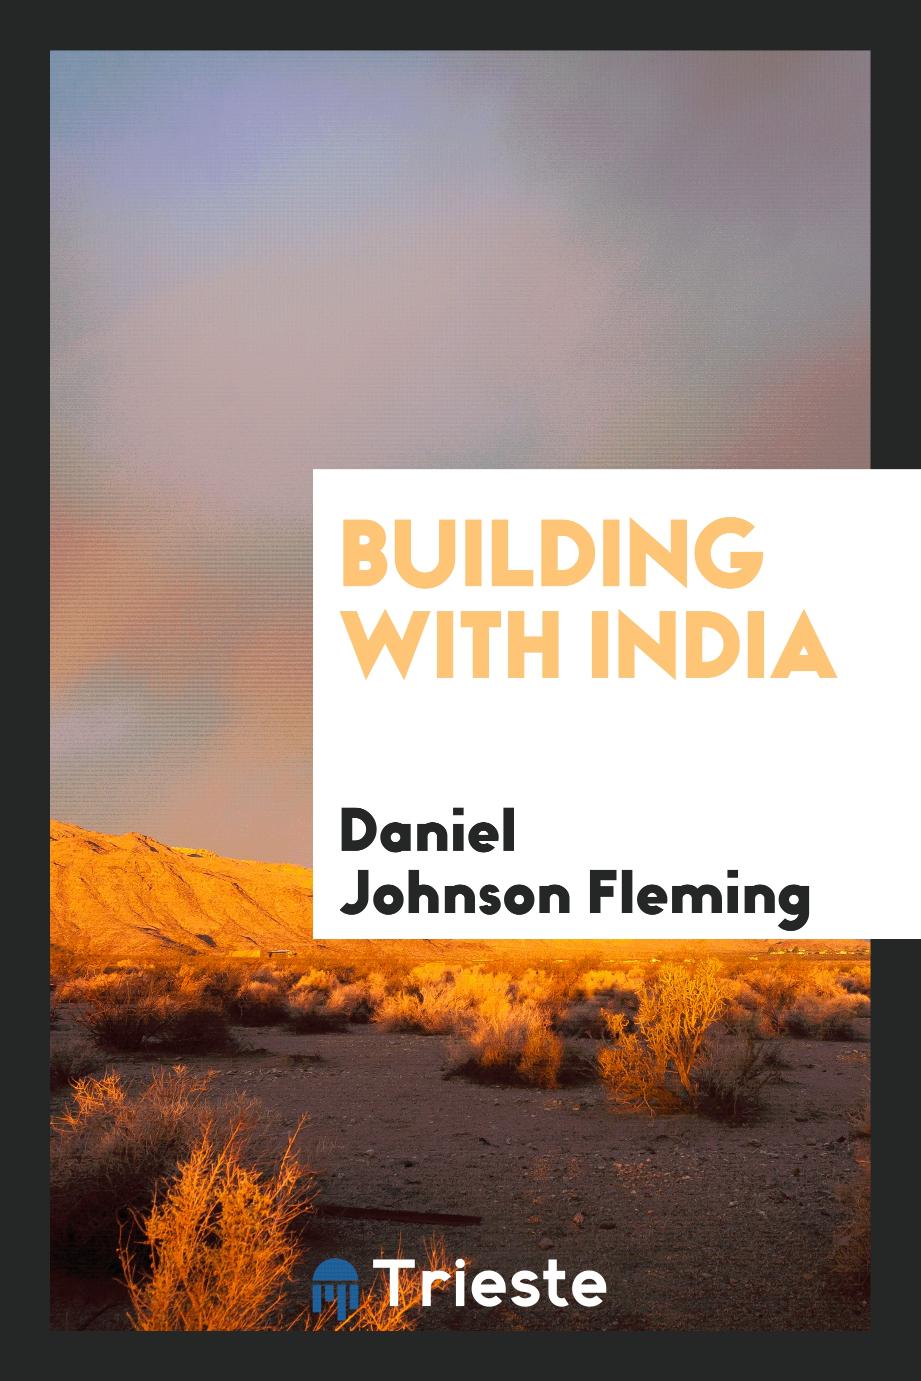 Building with India